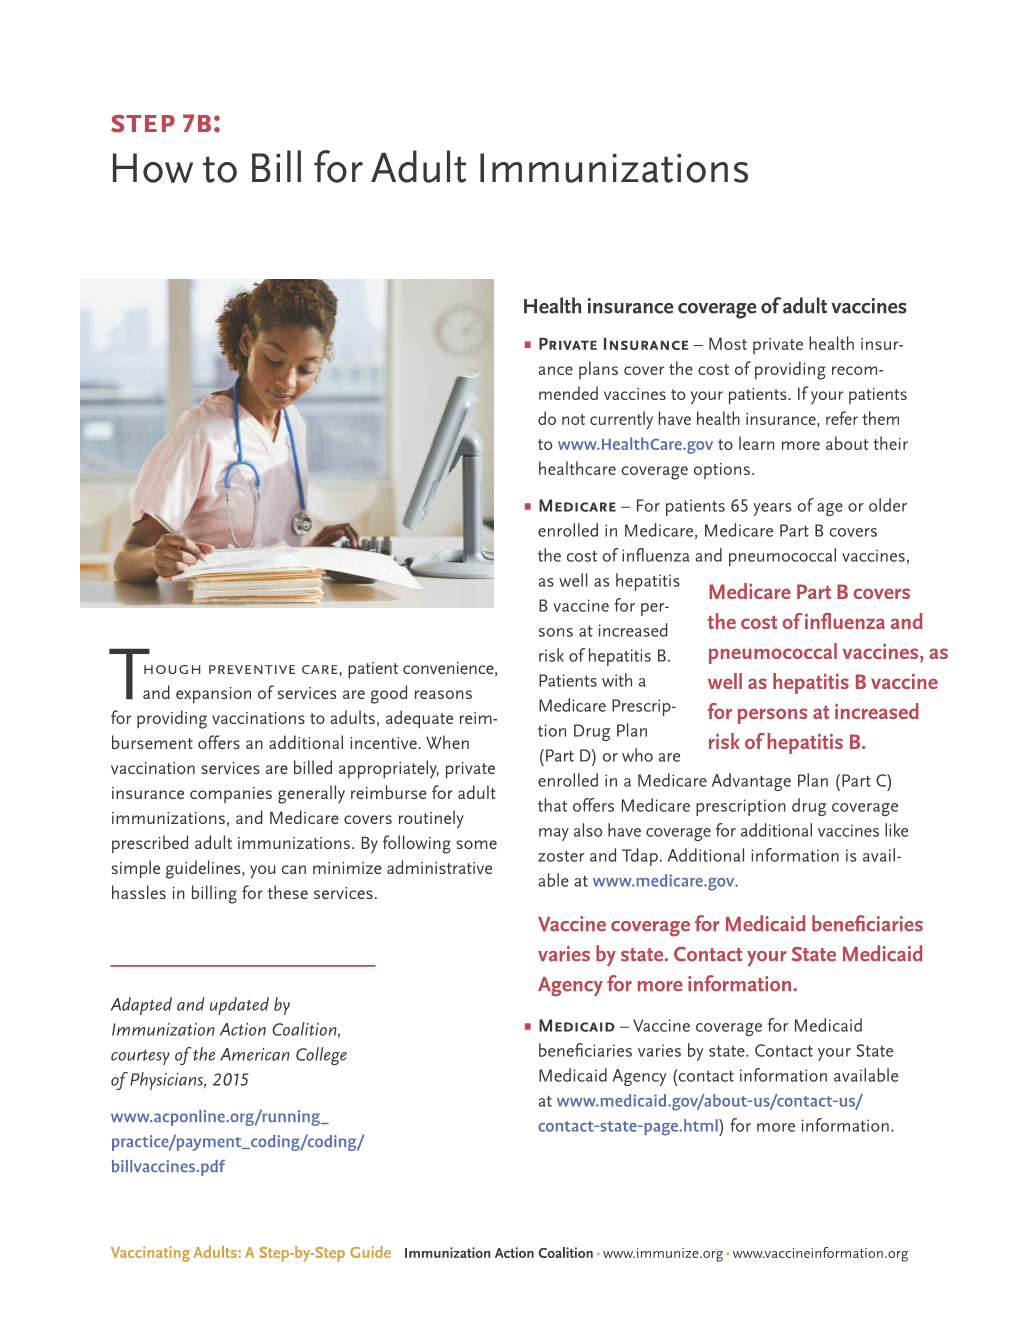 Step 7B How to Bill for Adult Immunizations